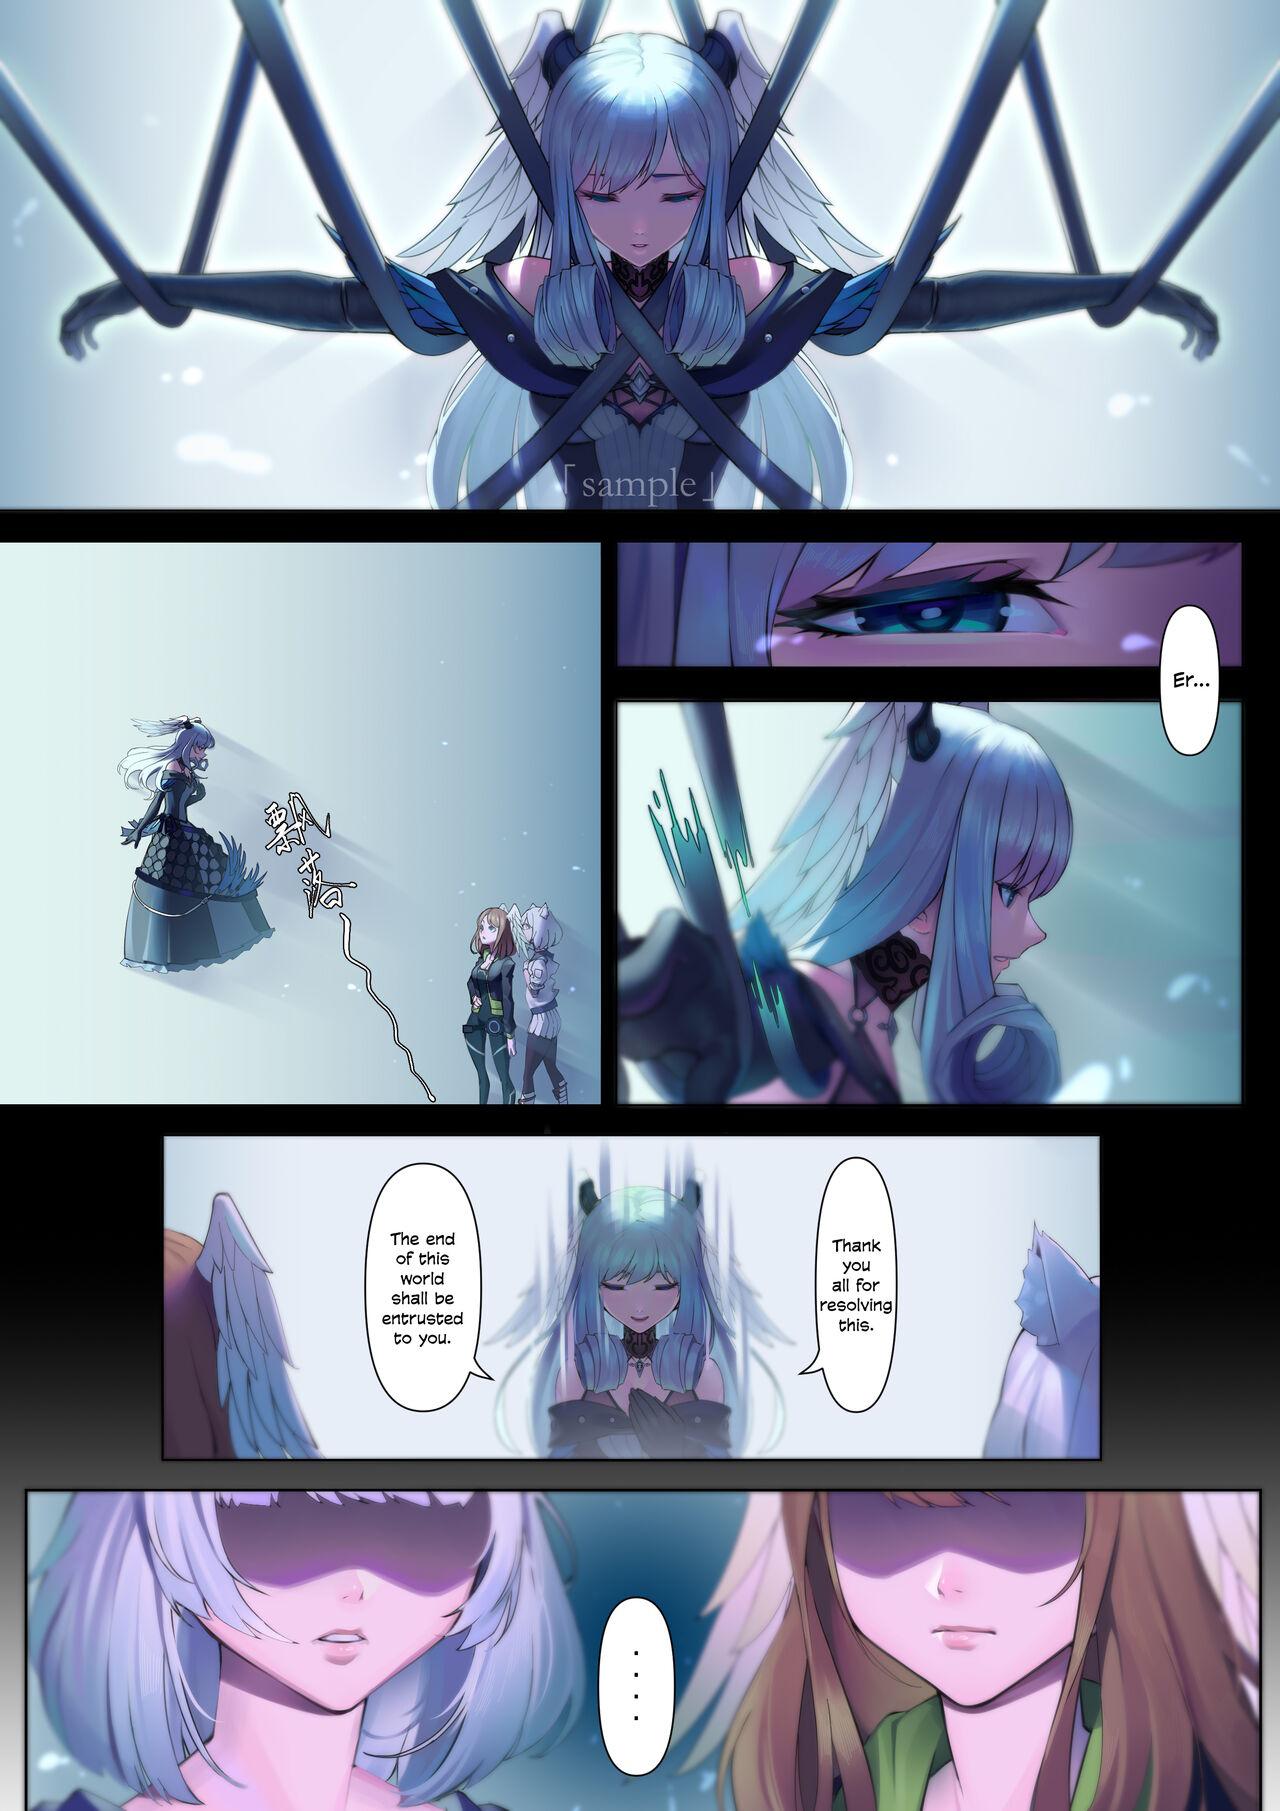 Stepmom 《Xe○blade3》Doujinshi Request - Xenoblade chronicles 3 Chilena - Page 4